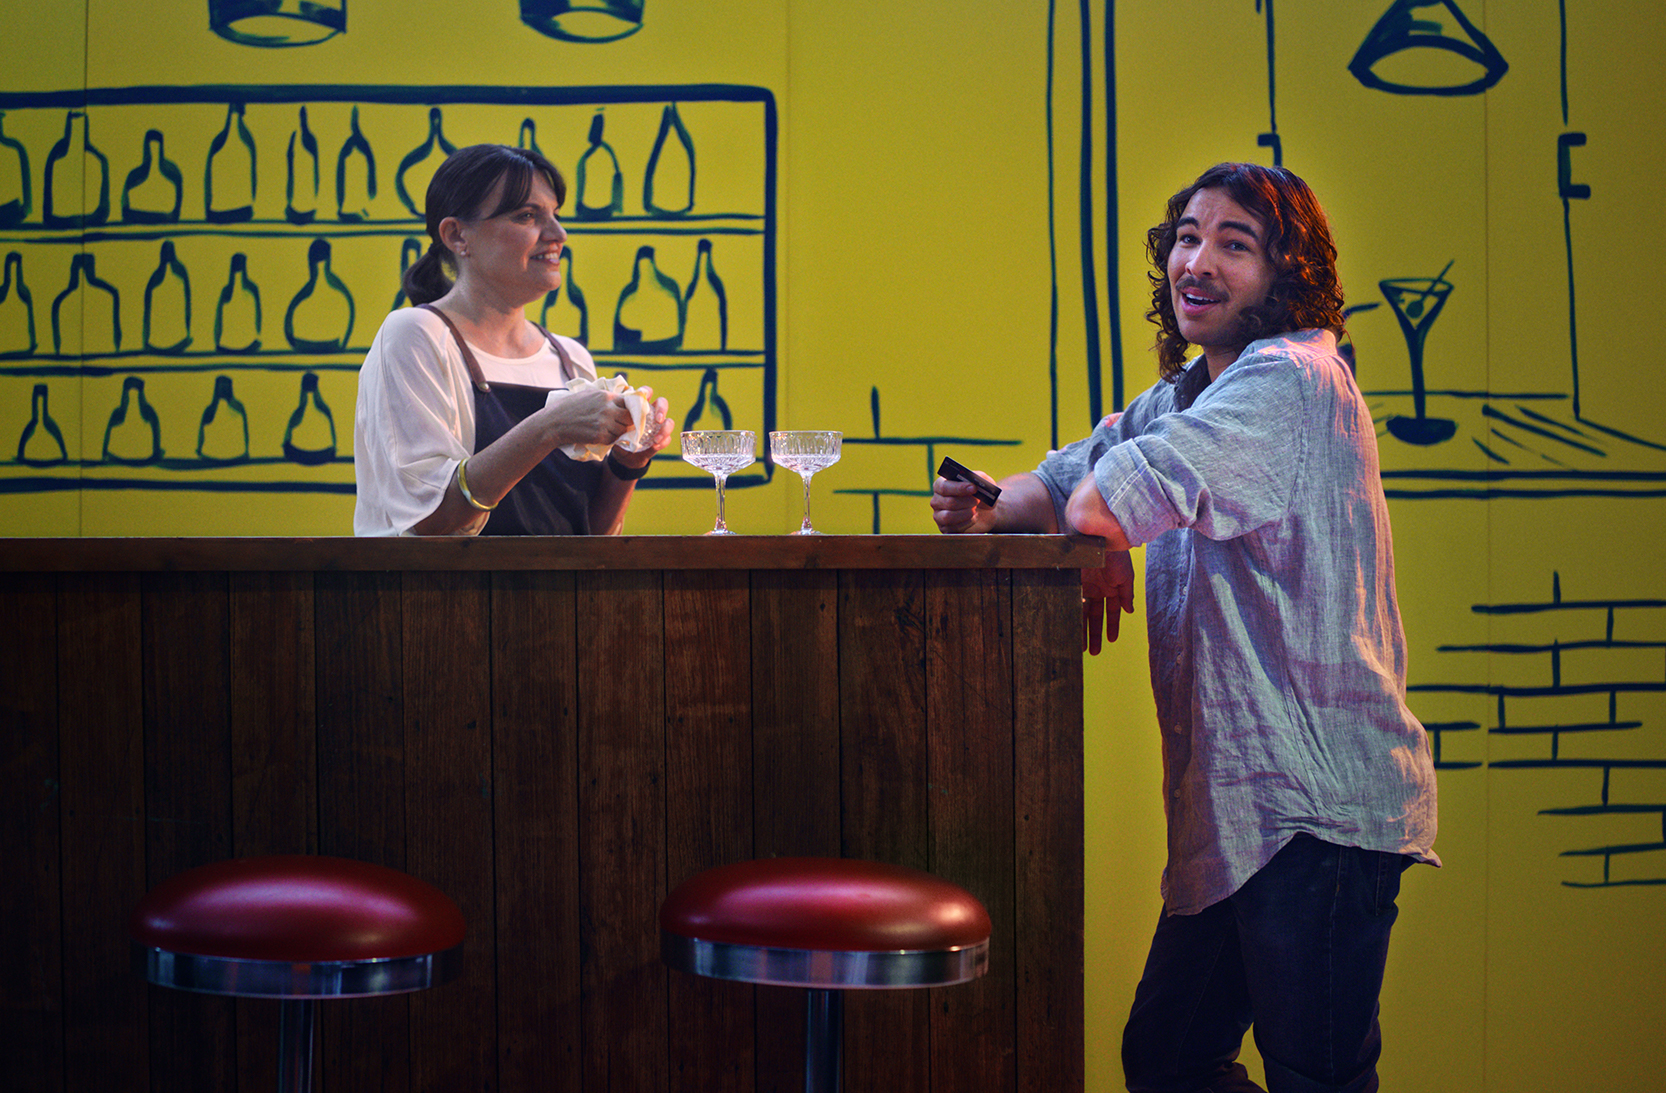 A woman in a white t-shirt with a denim apron stands behind a wooden bar, polishing a wine glass with two other glasses in front of her. A brunette man in a blue shirt and jeans is facing the camera in mid-conversation to the audience, holding a credit card. They are in front of a yellow and navy painted bar scene.